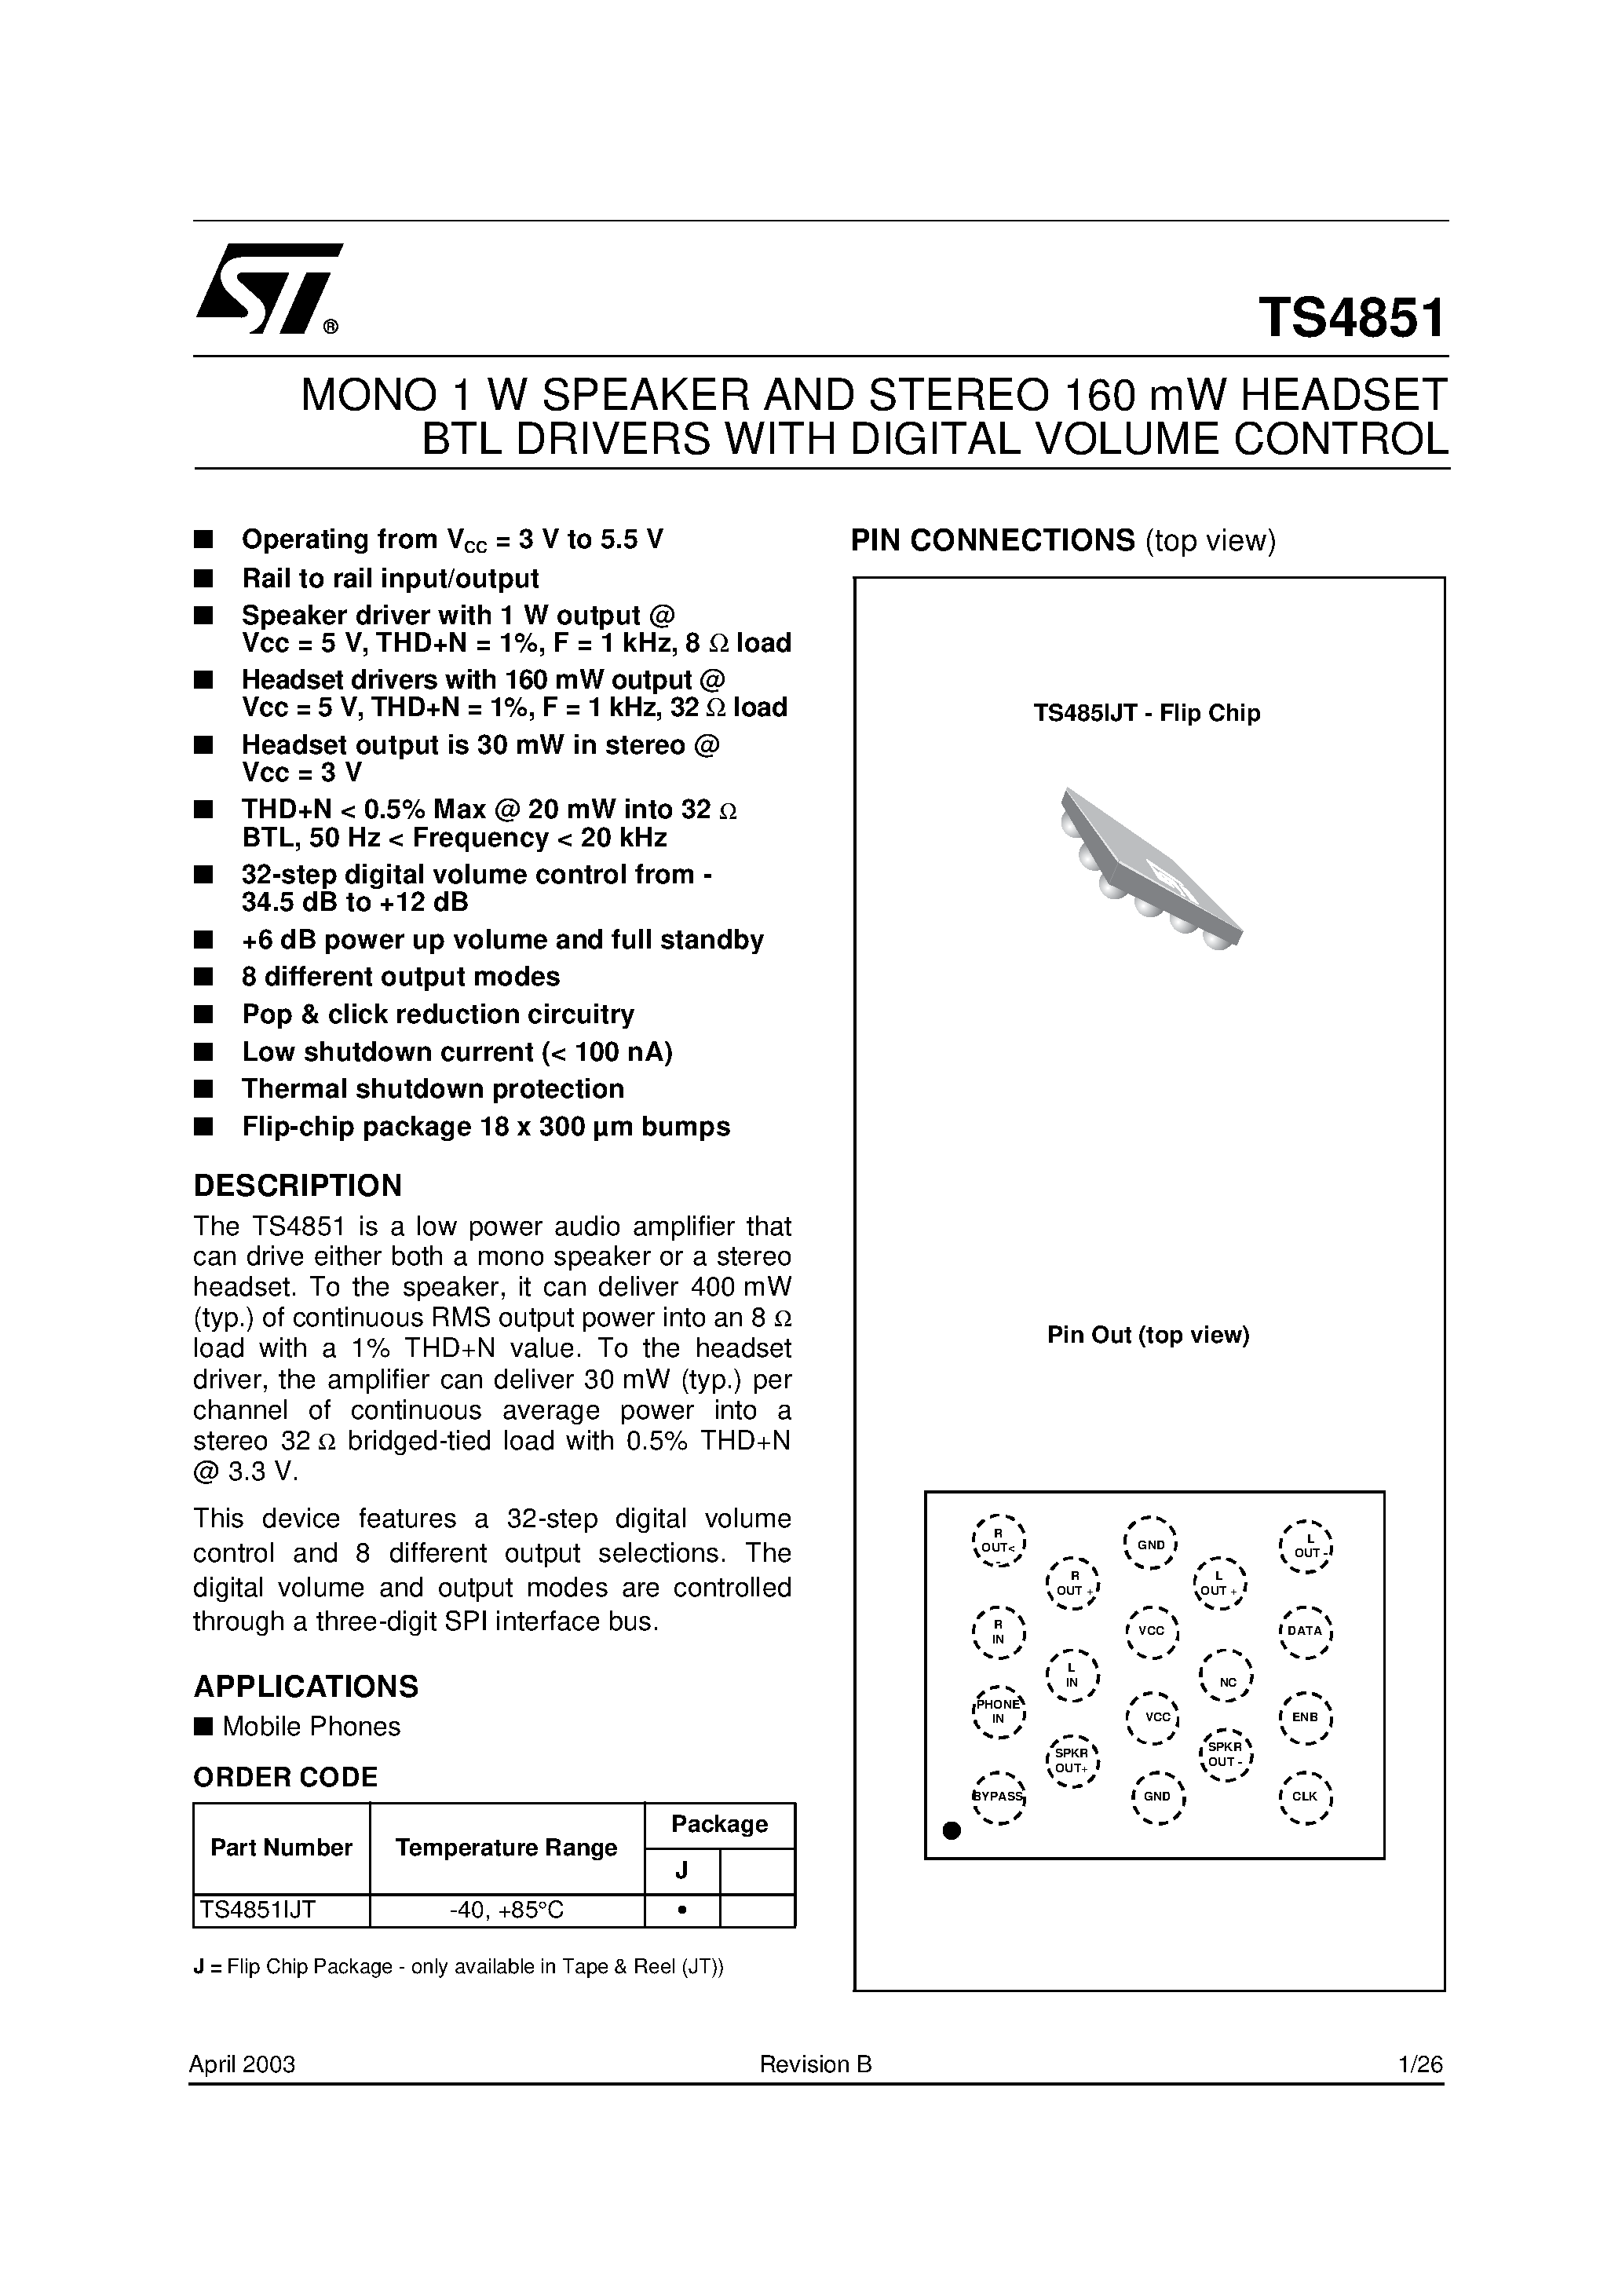 Datasheet TS4851 - MONO 1 W SPEAKER AND STEREO 160 mW HEADSET BTL DRIVERS WITH DIGITAL VOLUME CONTROL page 1